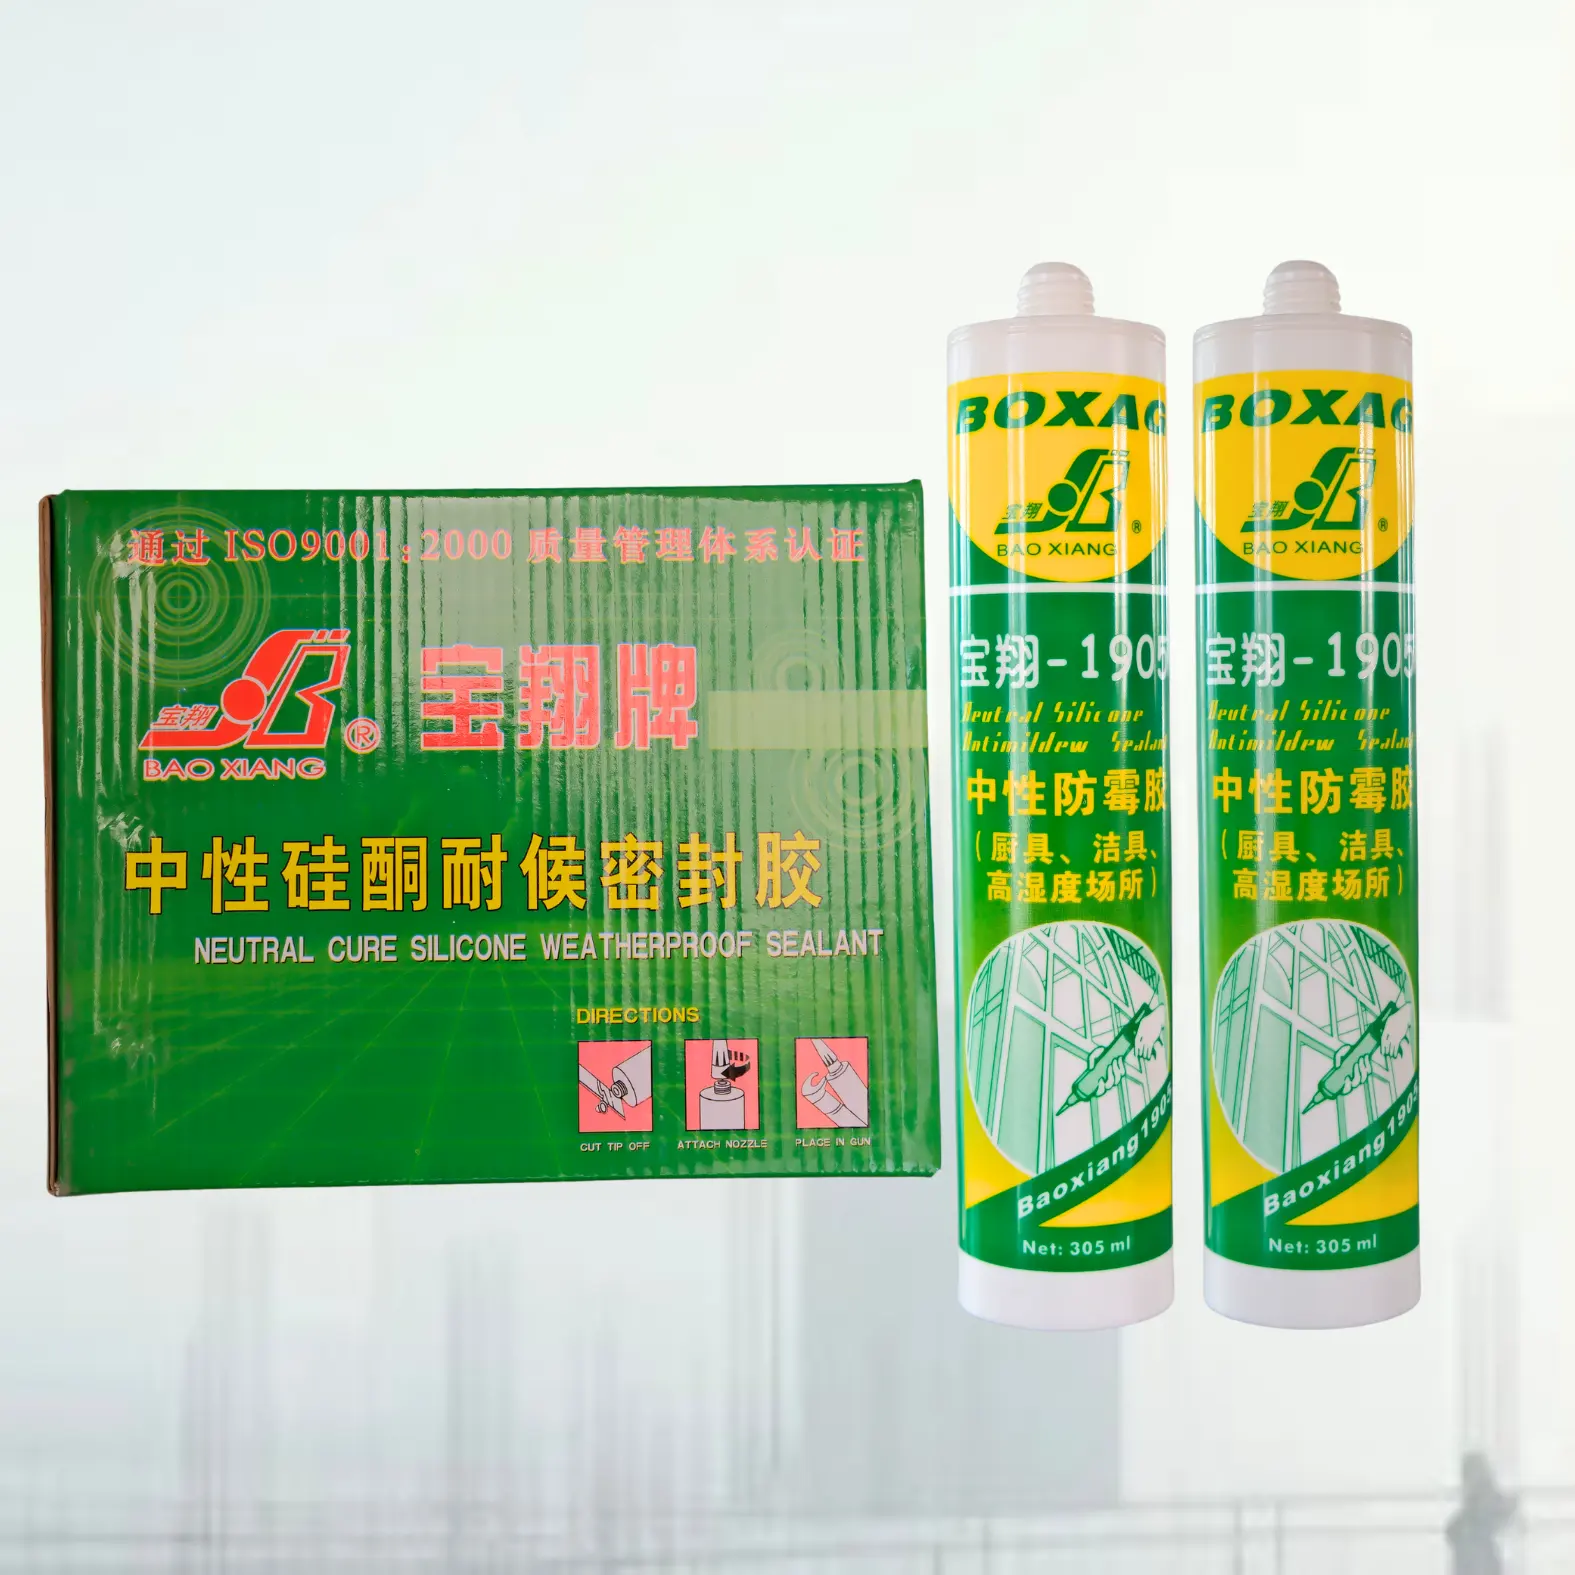 300ml Acid 100% Silicone Sealant Non-Toxic Waterproof Mastic Sealant for Glass Window Walls Cement Adhesive   Sealant Product